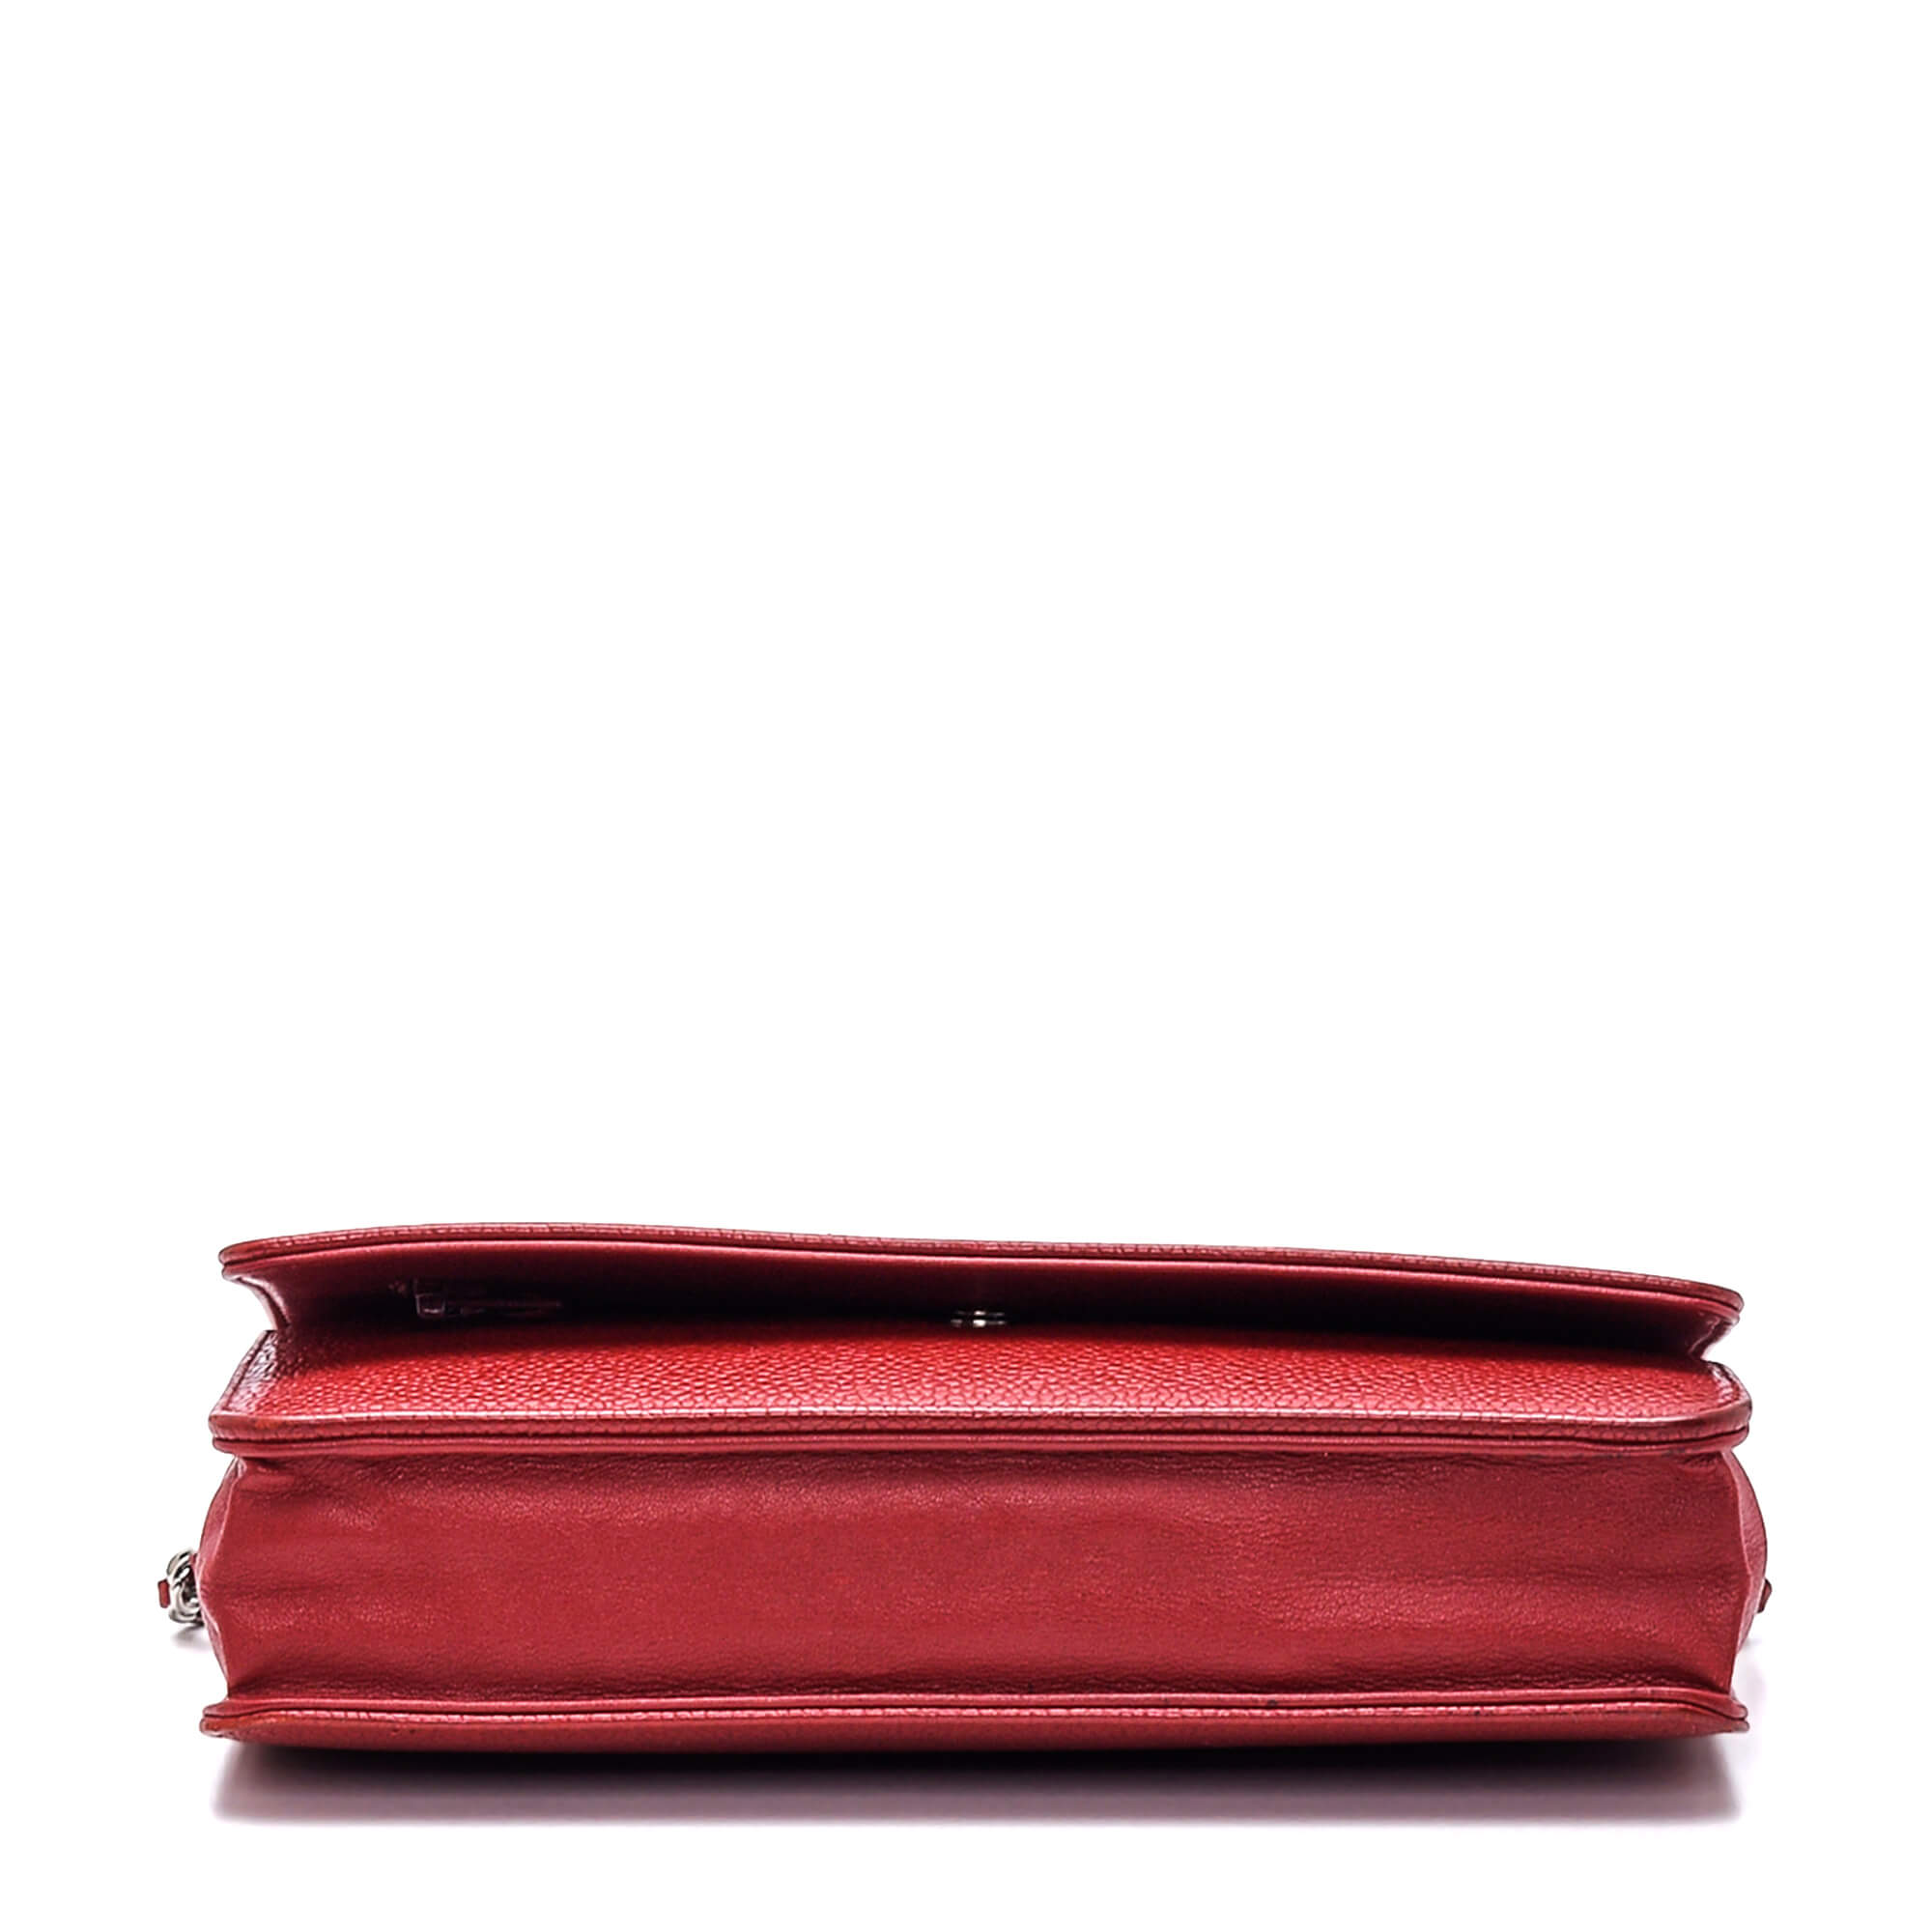 Chanel - Red Caviar Leather Wallet on Chain Bag